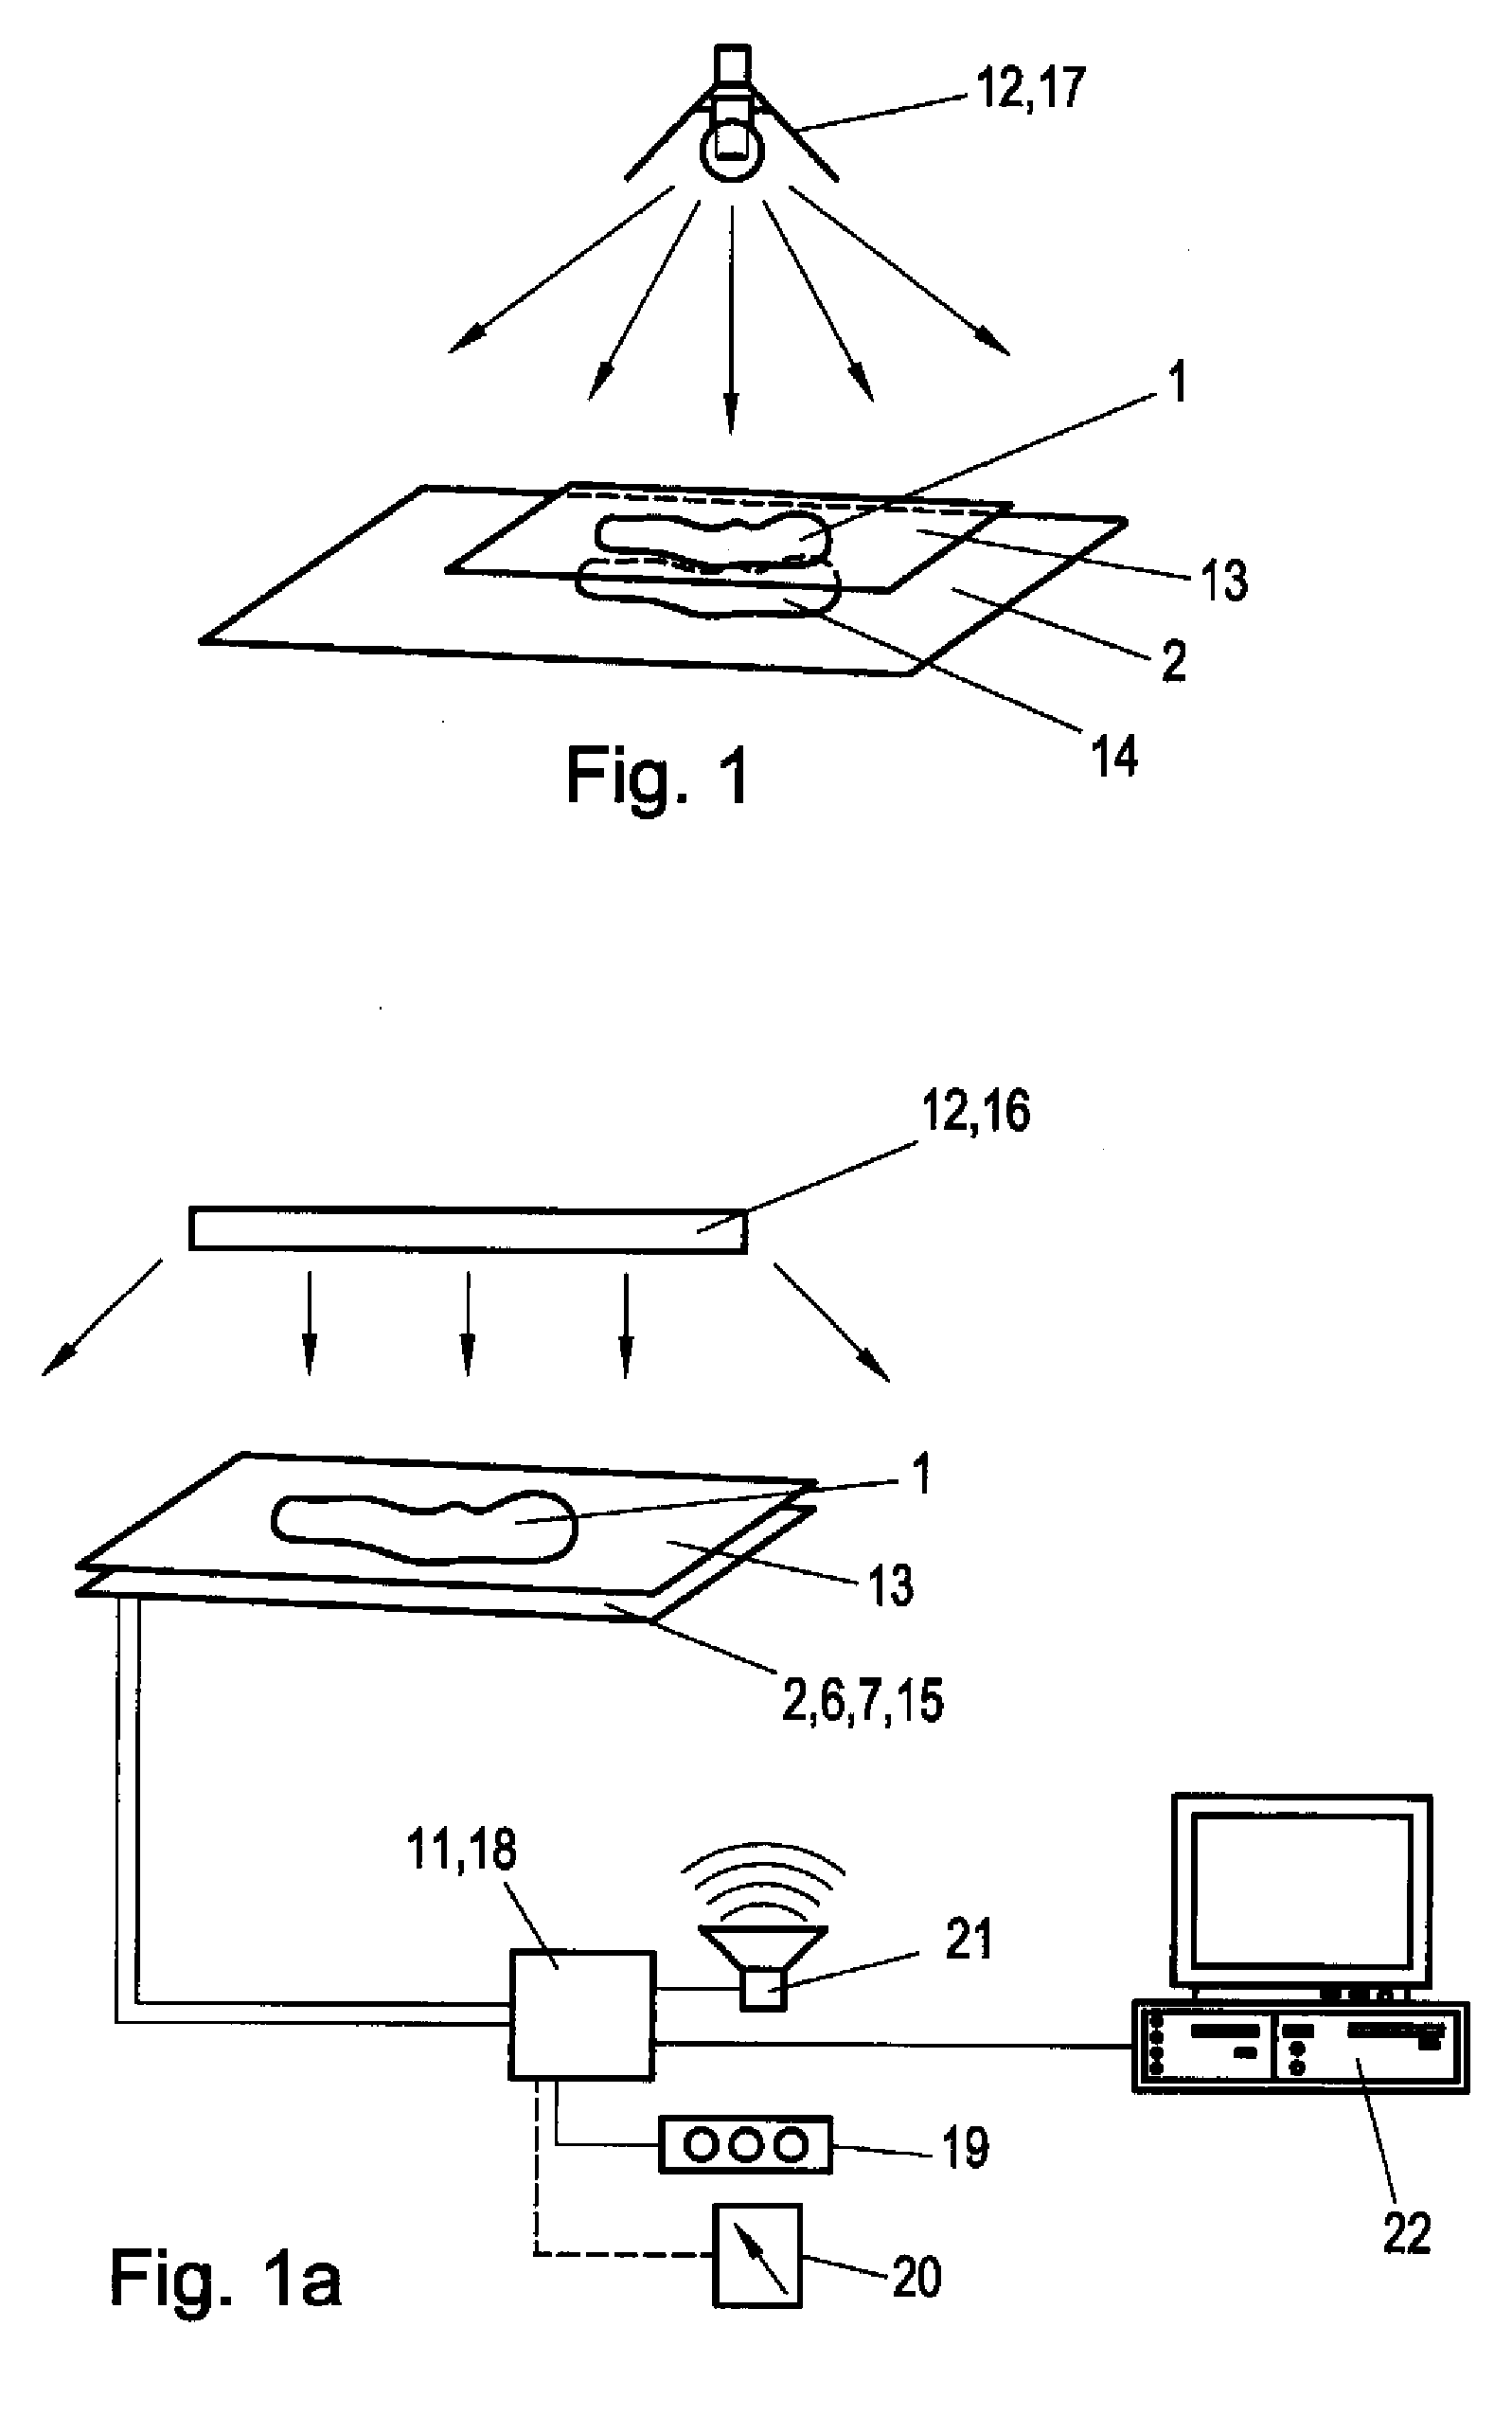 Apparatus for determining a physical quantity